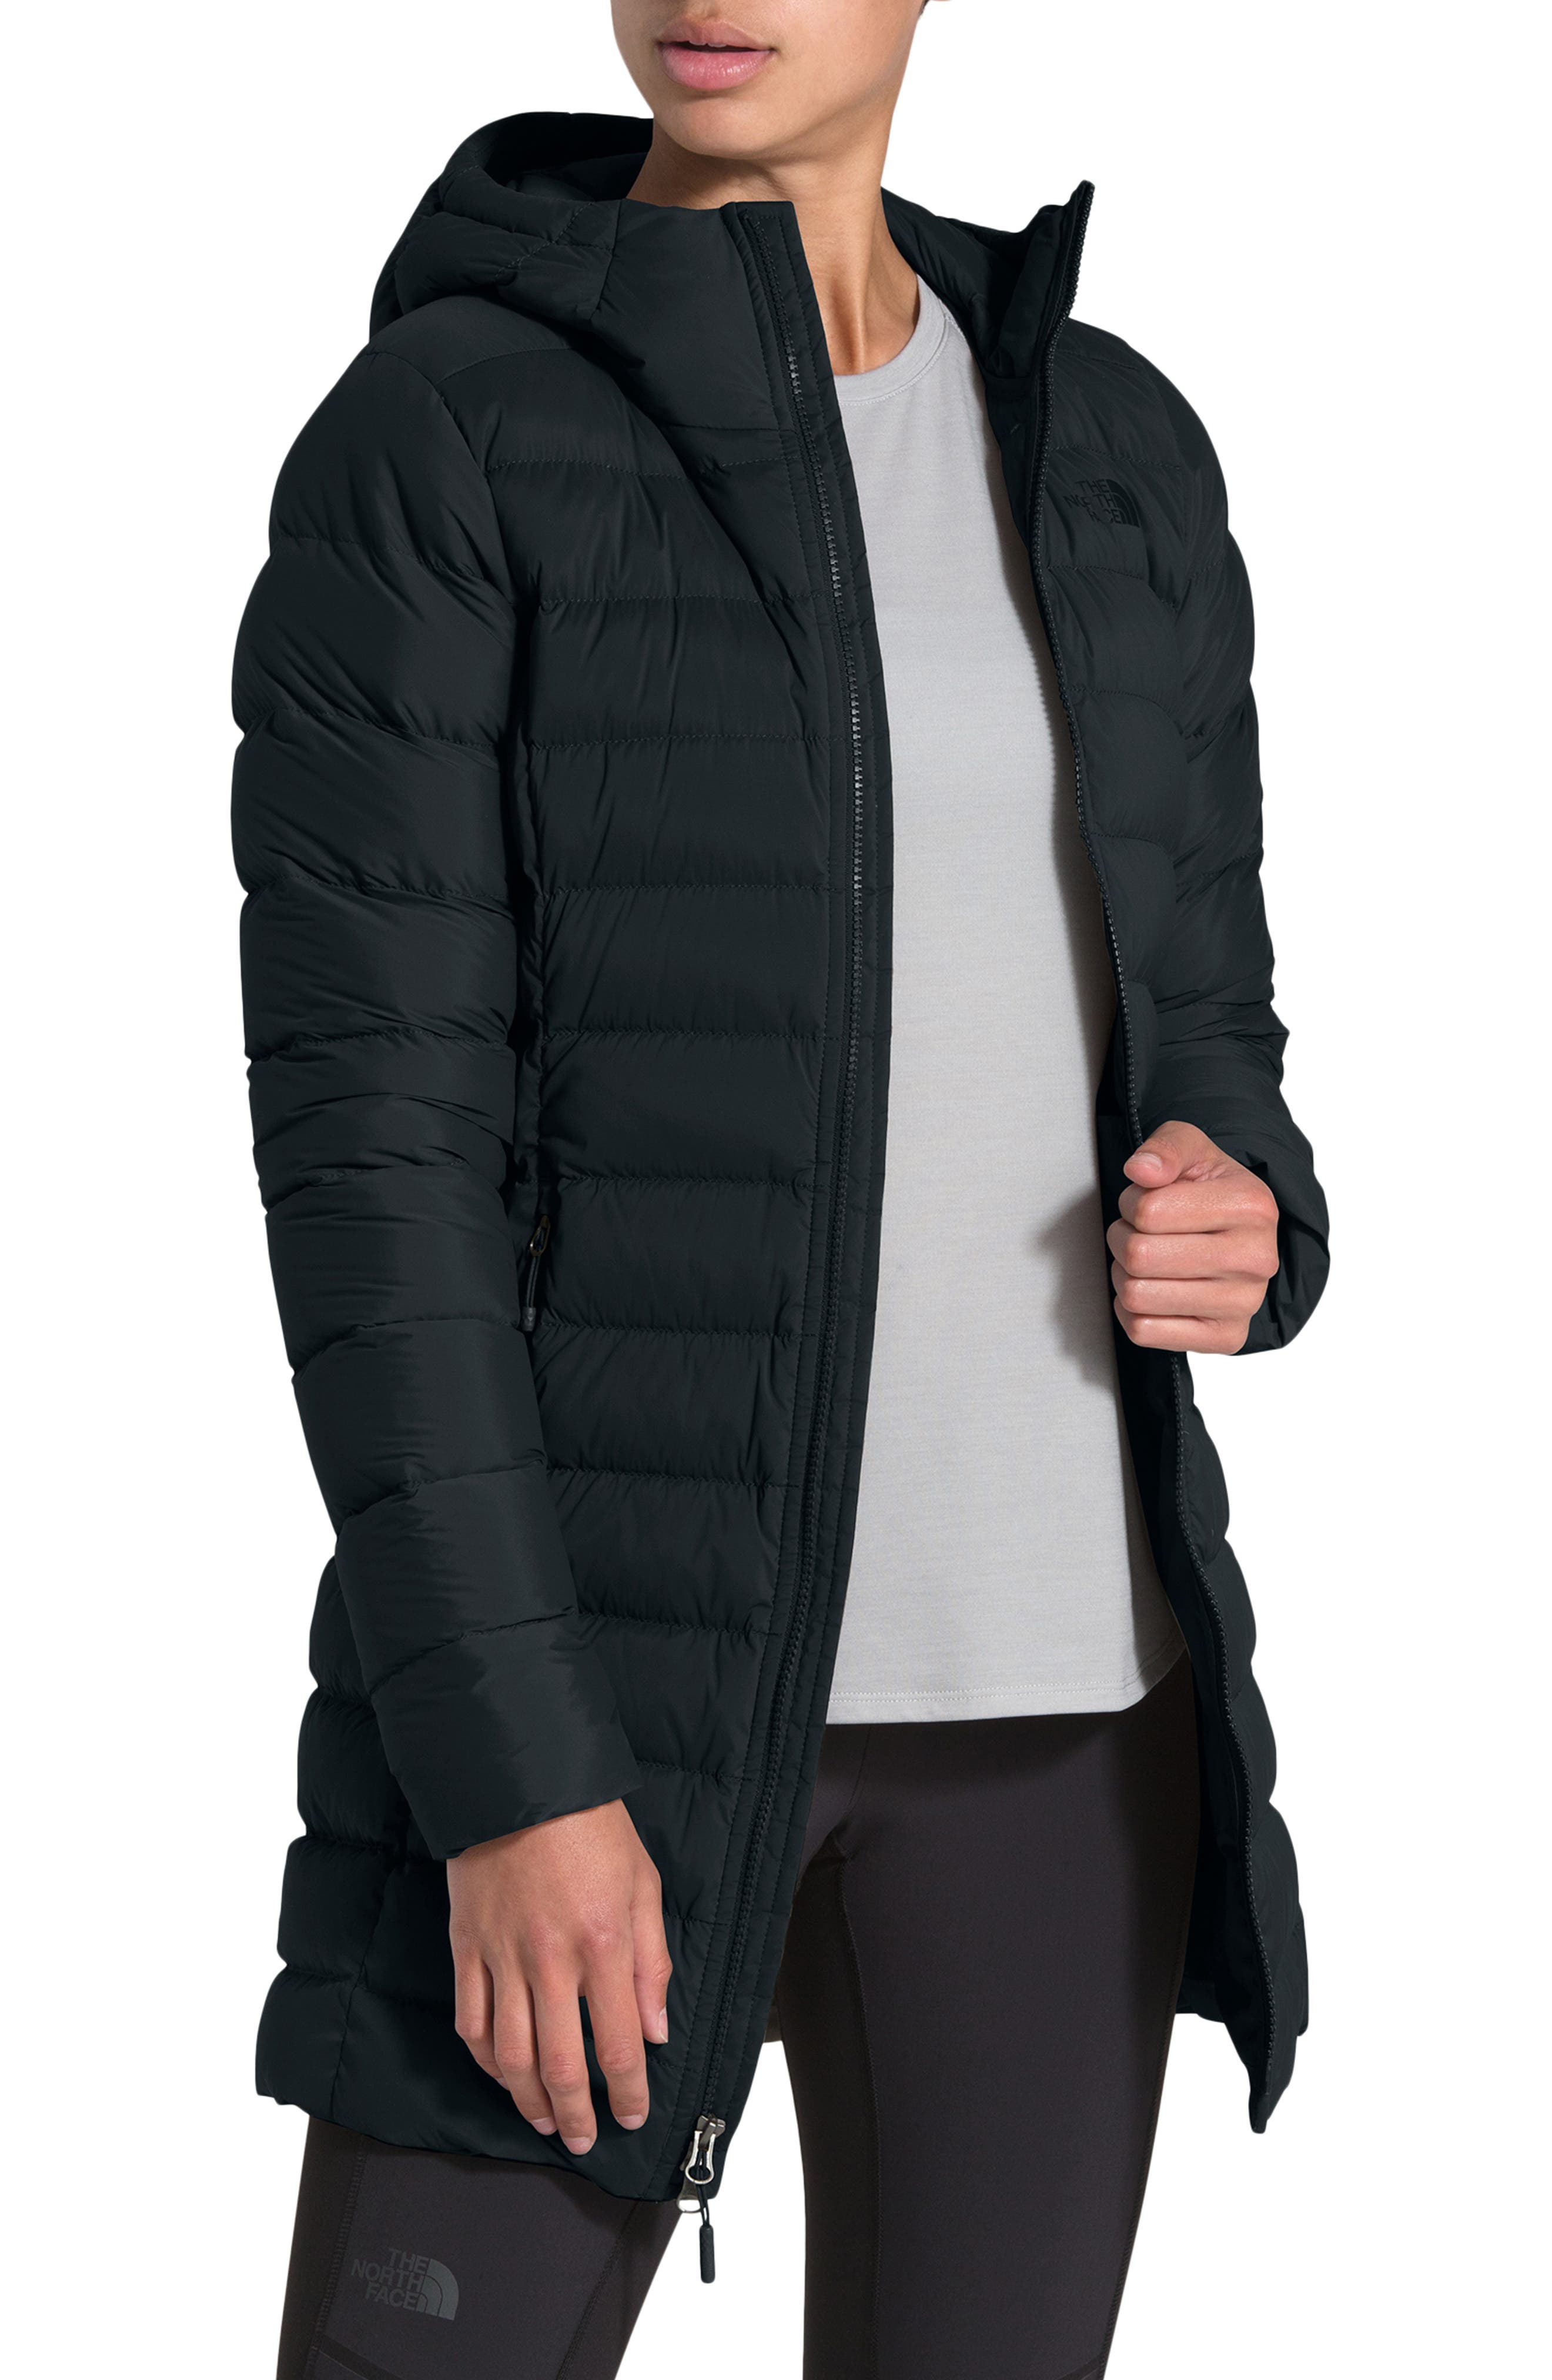 womens north face 700 down jacket